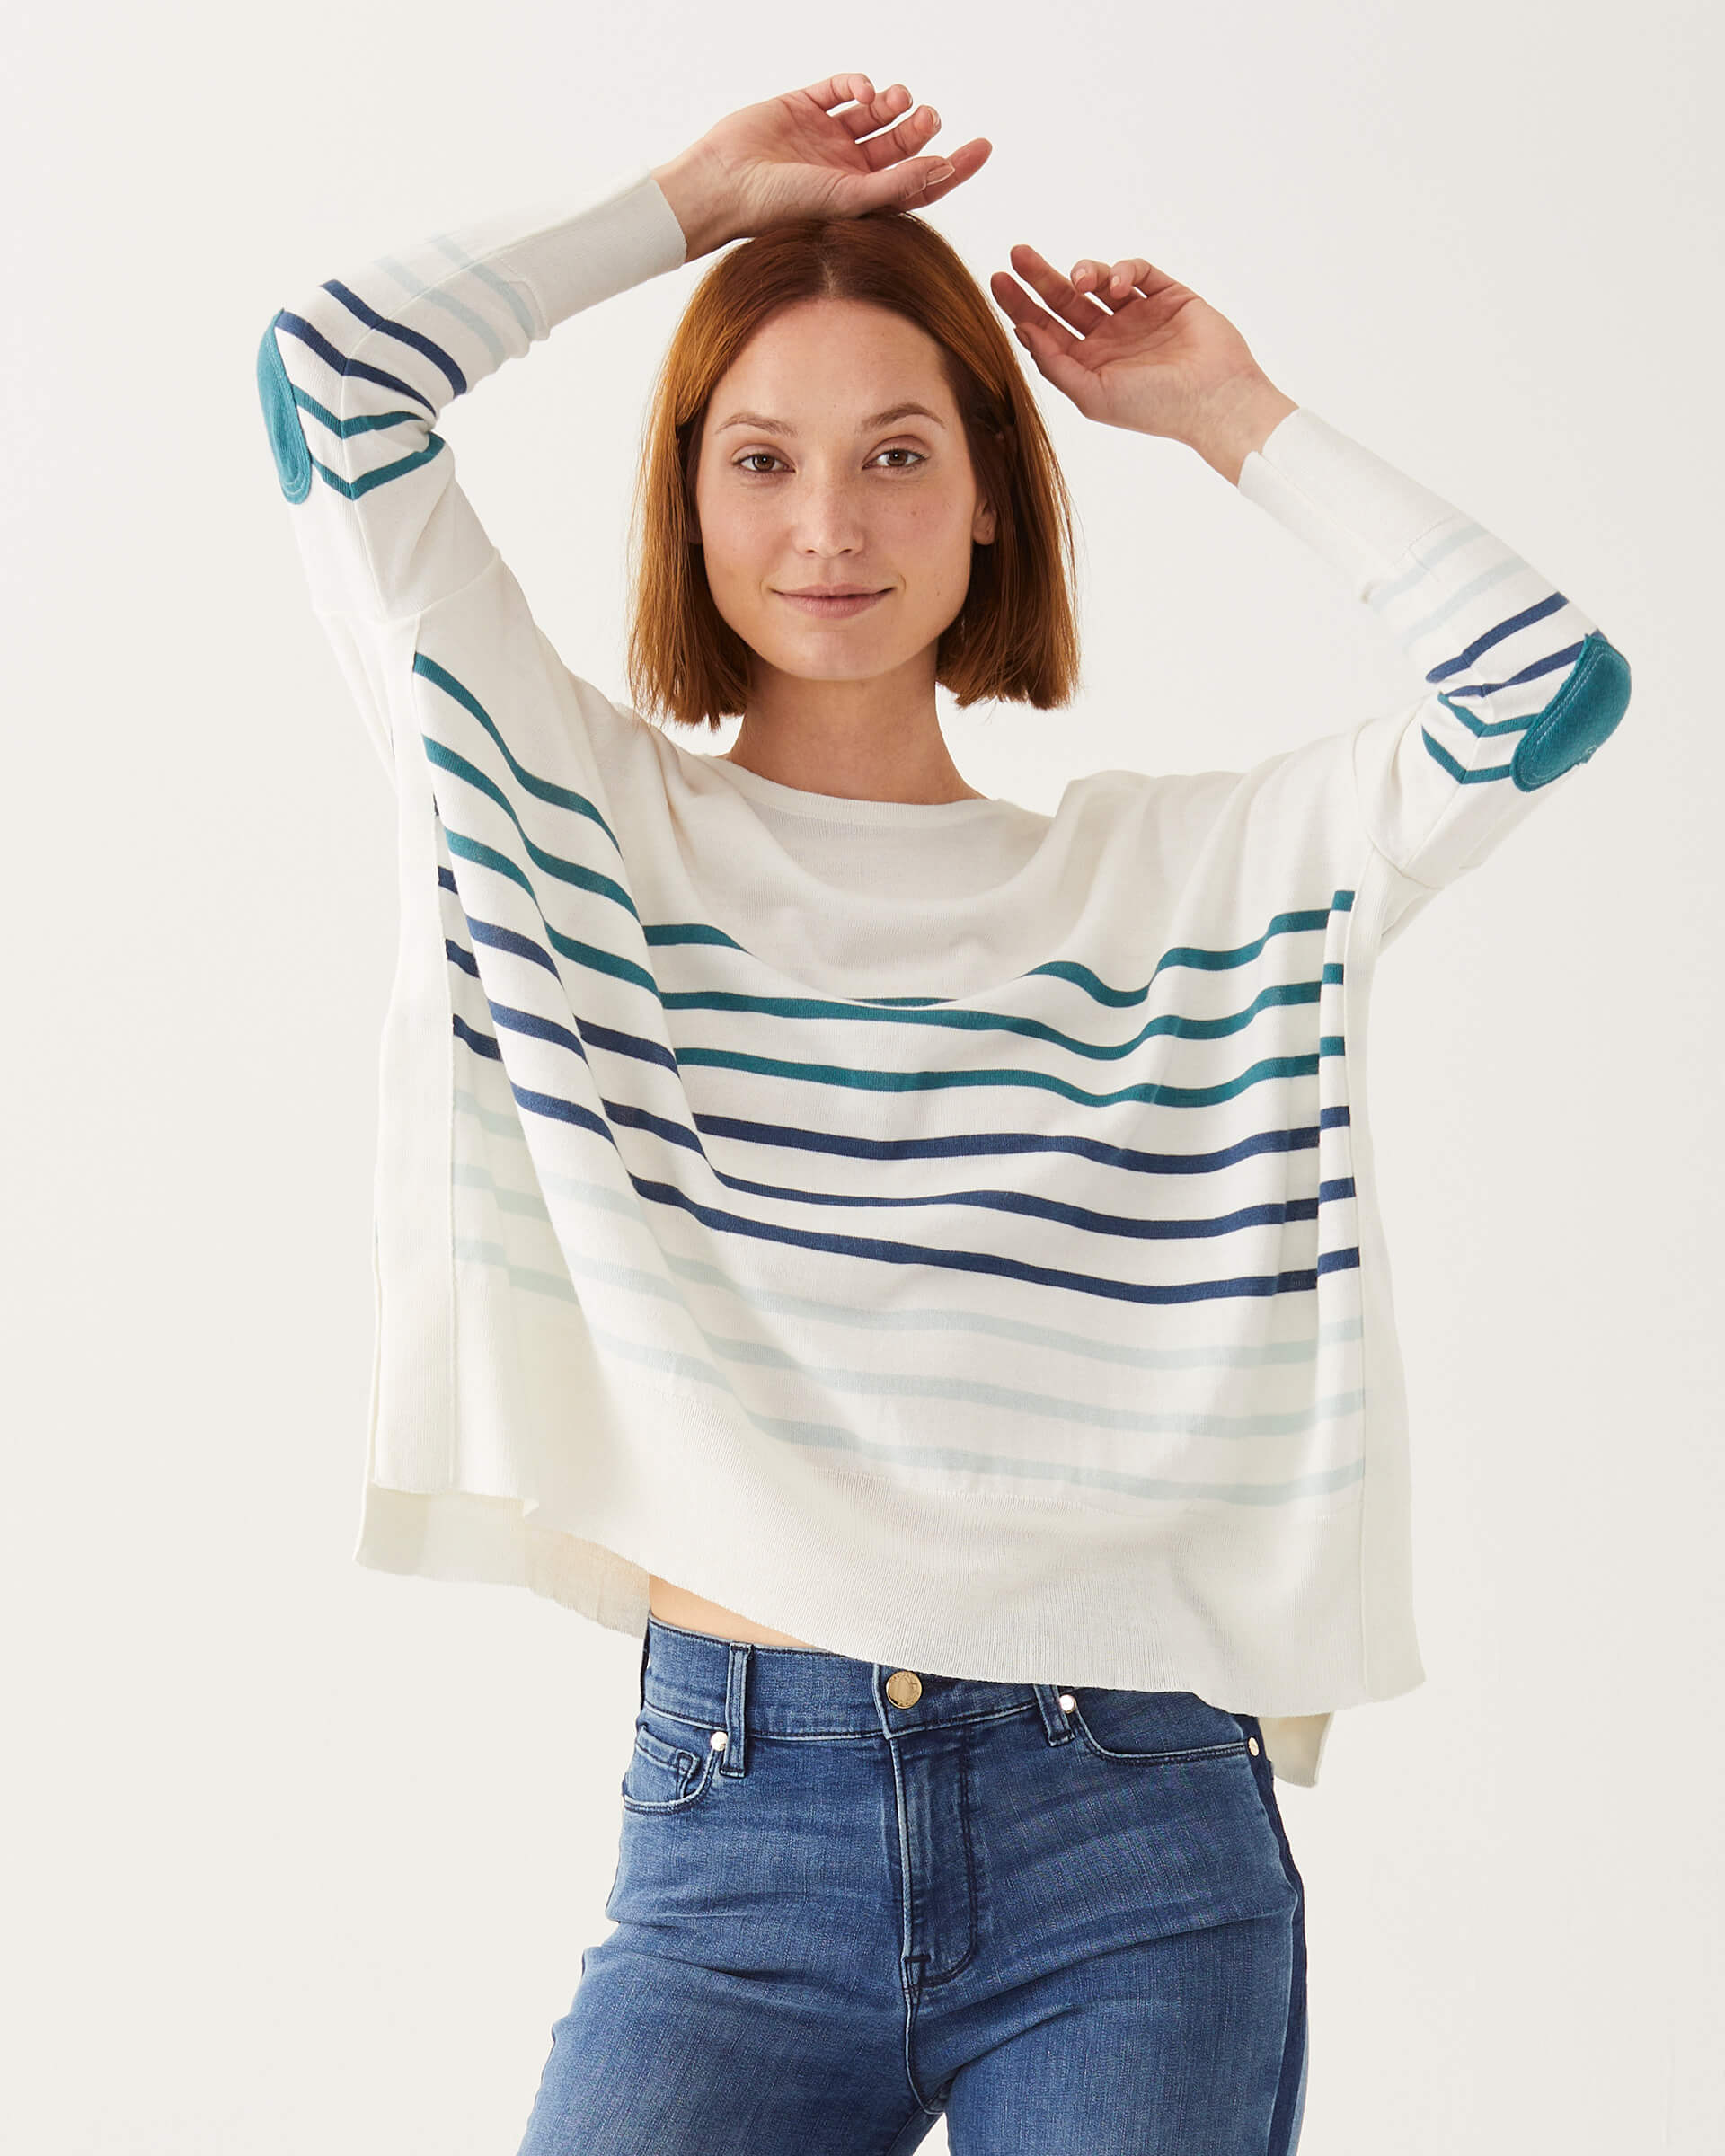 female wearing white and blue stripe sweater with heart elbow patch arms raised on white background